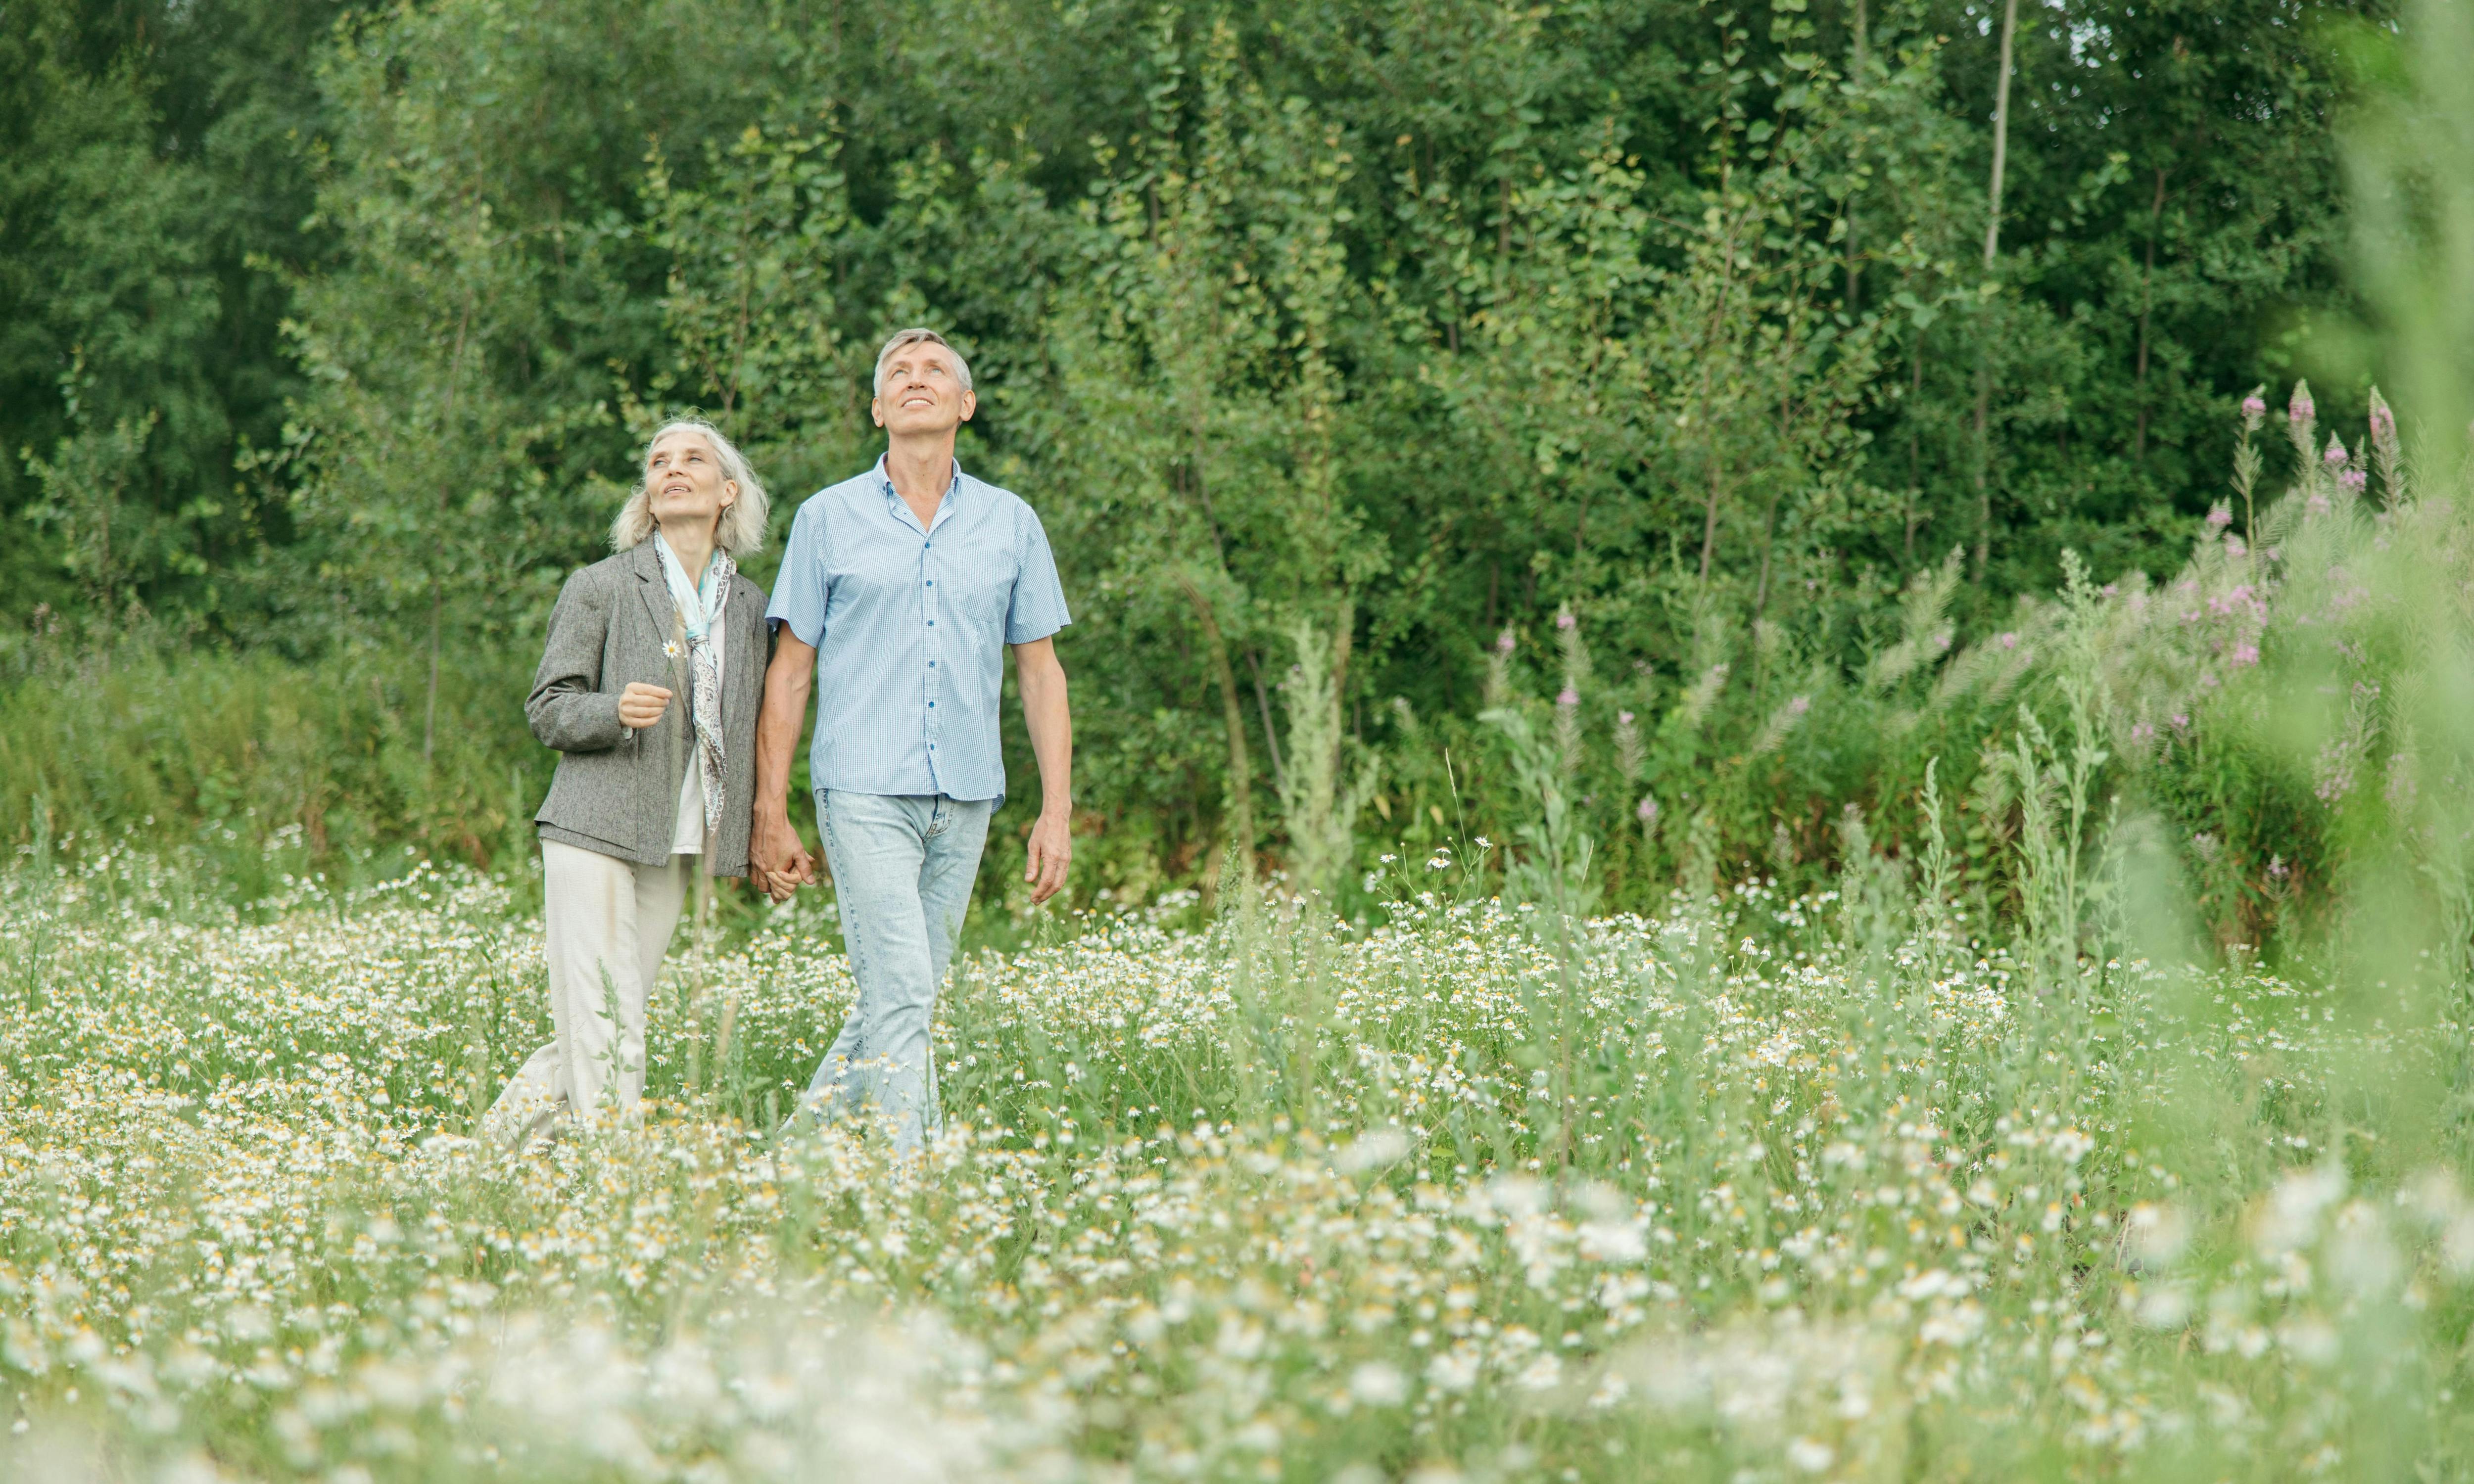 A retiree couple holding hands while standing in a lush, flower-filled field, conveying a sense of peace and companionship in their golden years.